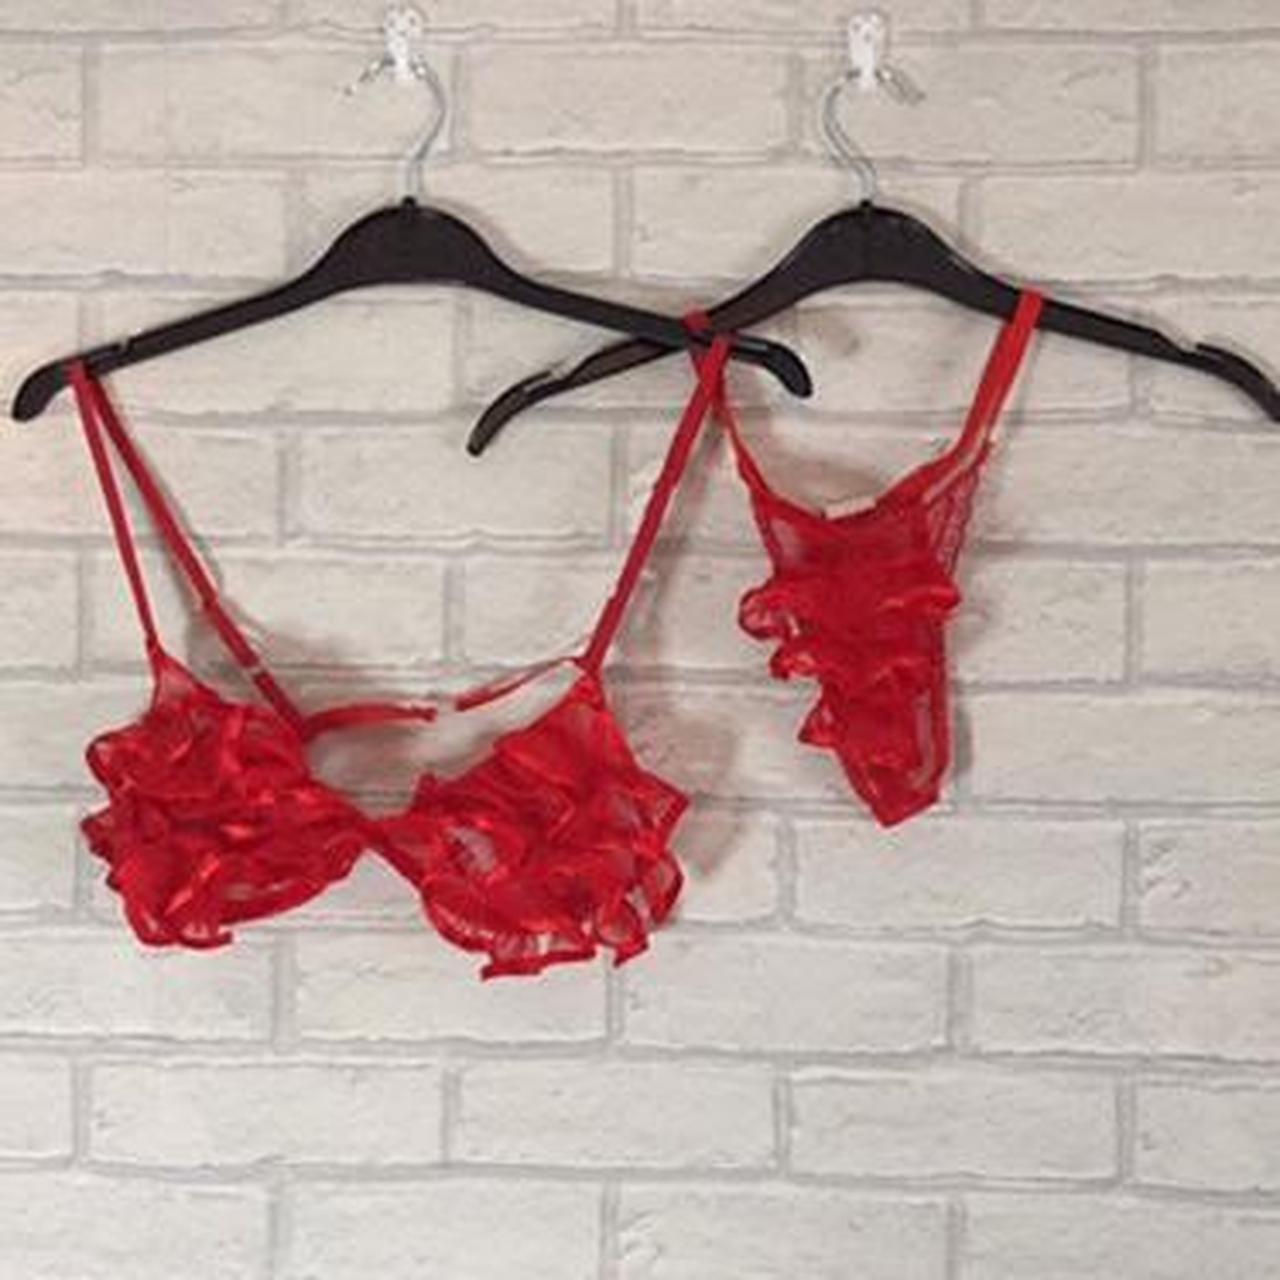 Red sheer lace mesh cami top / lingerie with ruffle - Depop